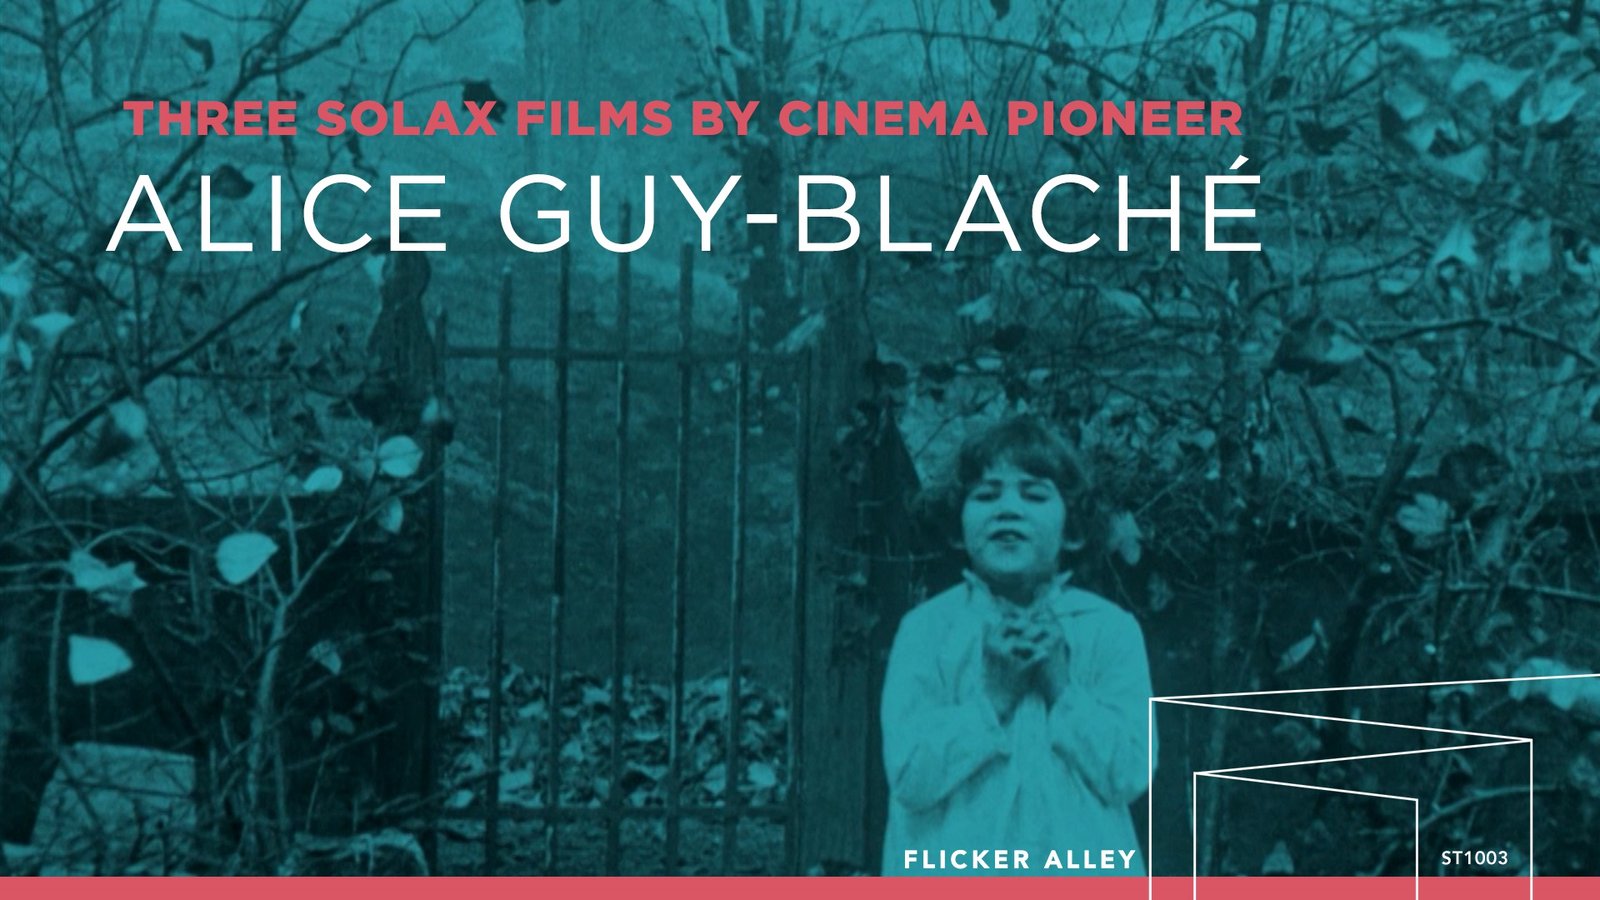 Three Films by Alice Guy Blaché (A House Divided, Canned Harmony, and Falling Leaves)